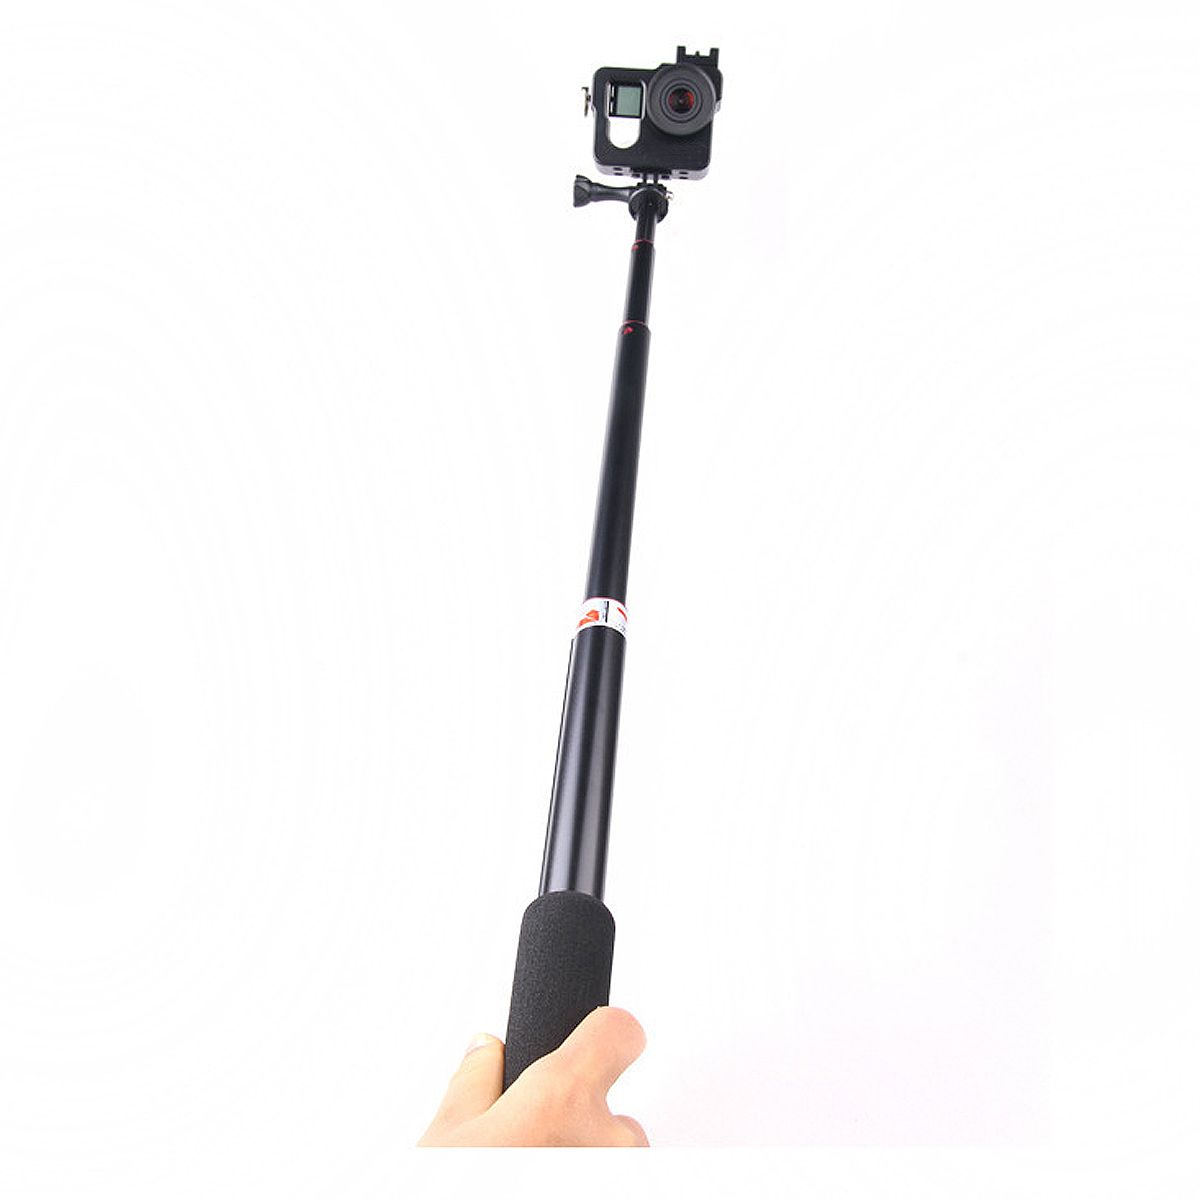 Extendable-Folding-Monopod-Remote-Selfie-Stick-Tripod-with-bluetooth-Shutter-for-Smartphone-Action-C-1639177